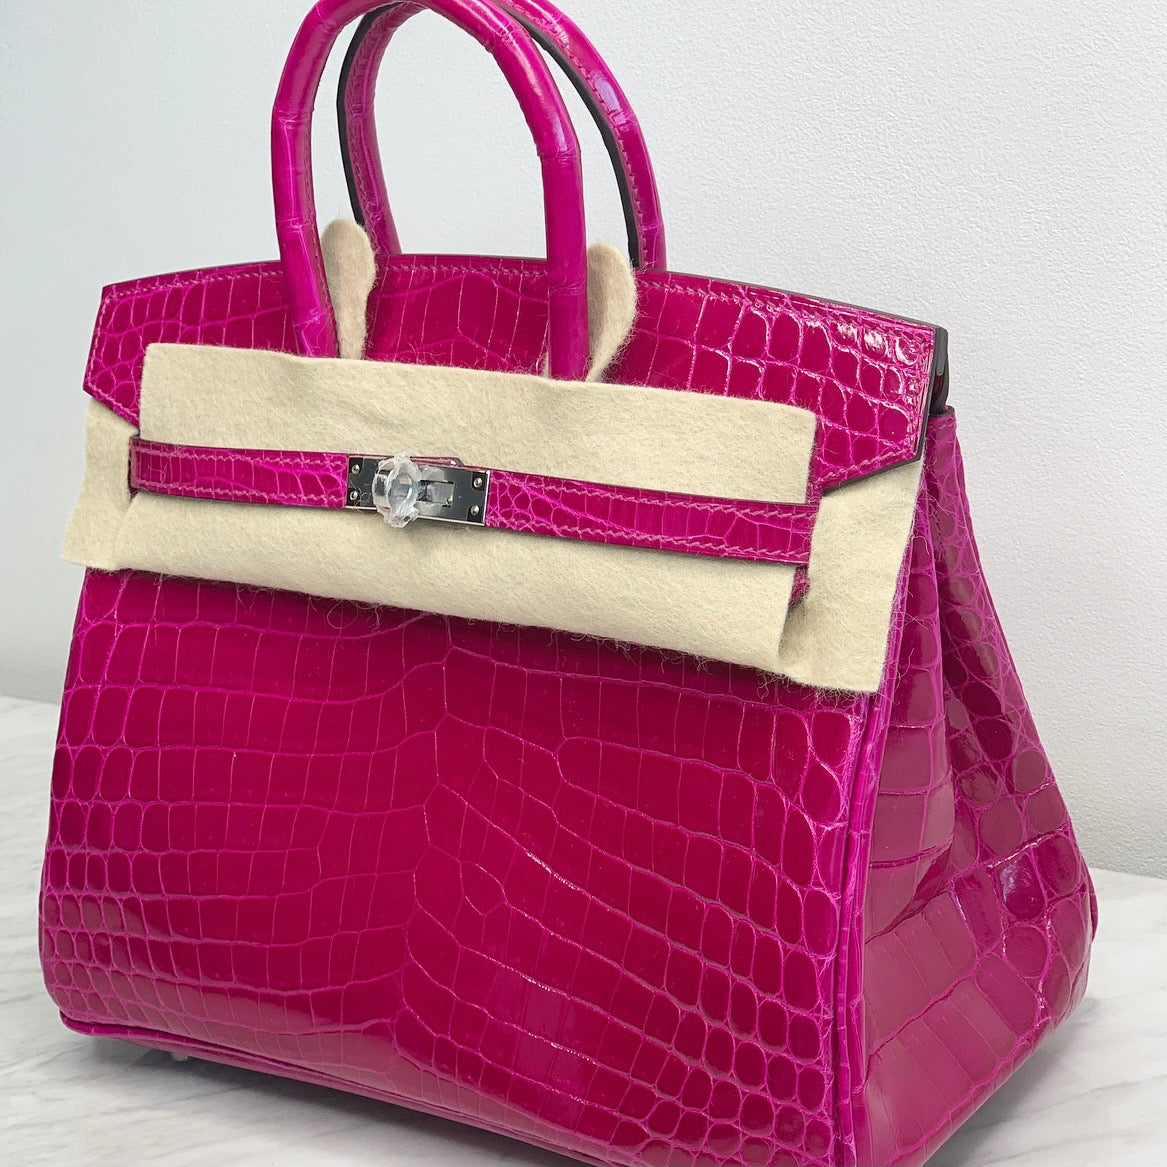 Fashionphile - Looking for something REALLY special? We have a Hermes Shiny  Niloticus Crocodile Birkin 25 in Rose Scheherazade. It's crafted of shiny  exotic niloticus crocodile leather in bright pink, perfect for